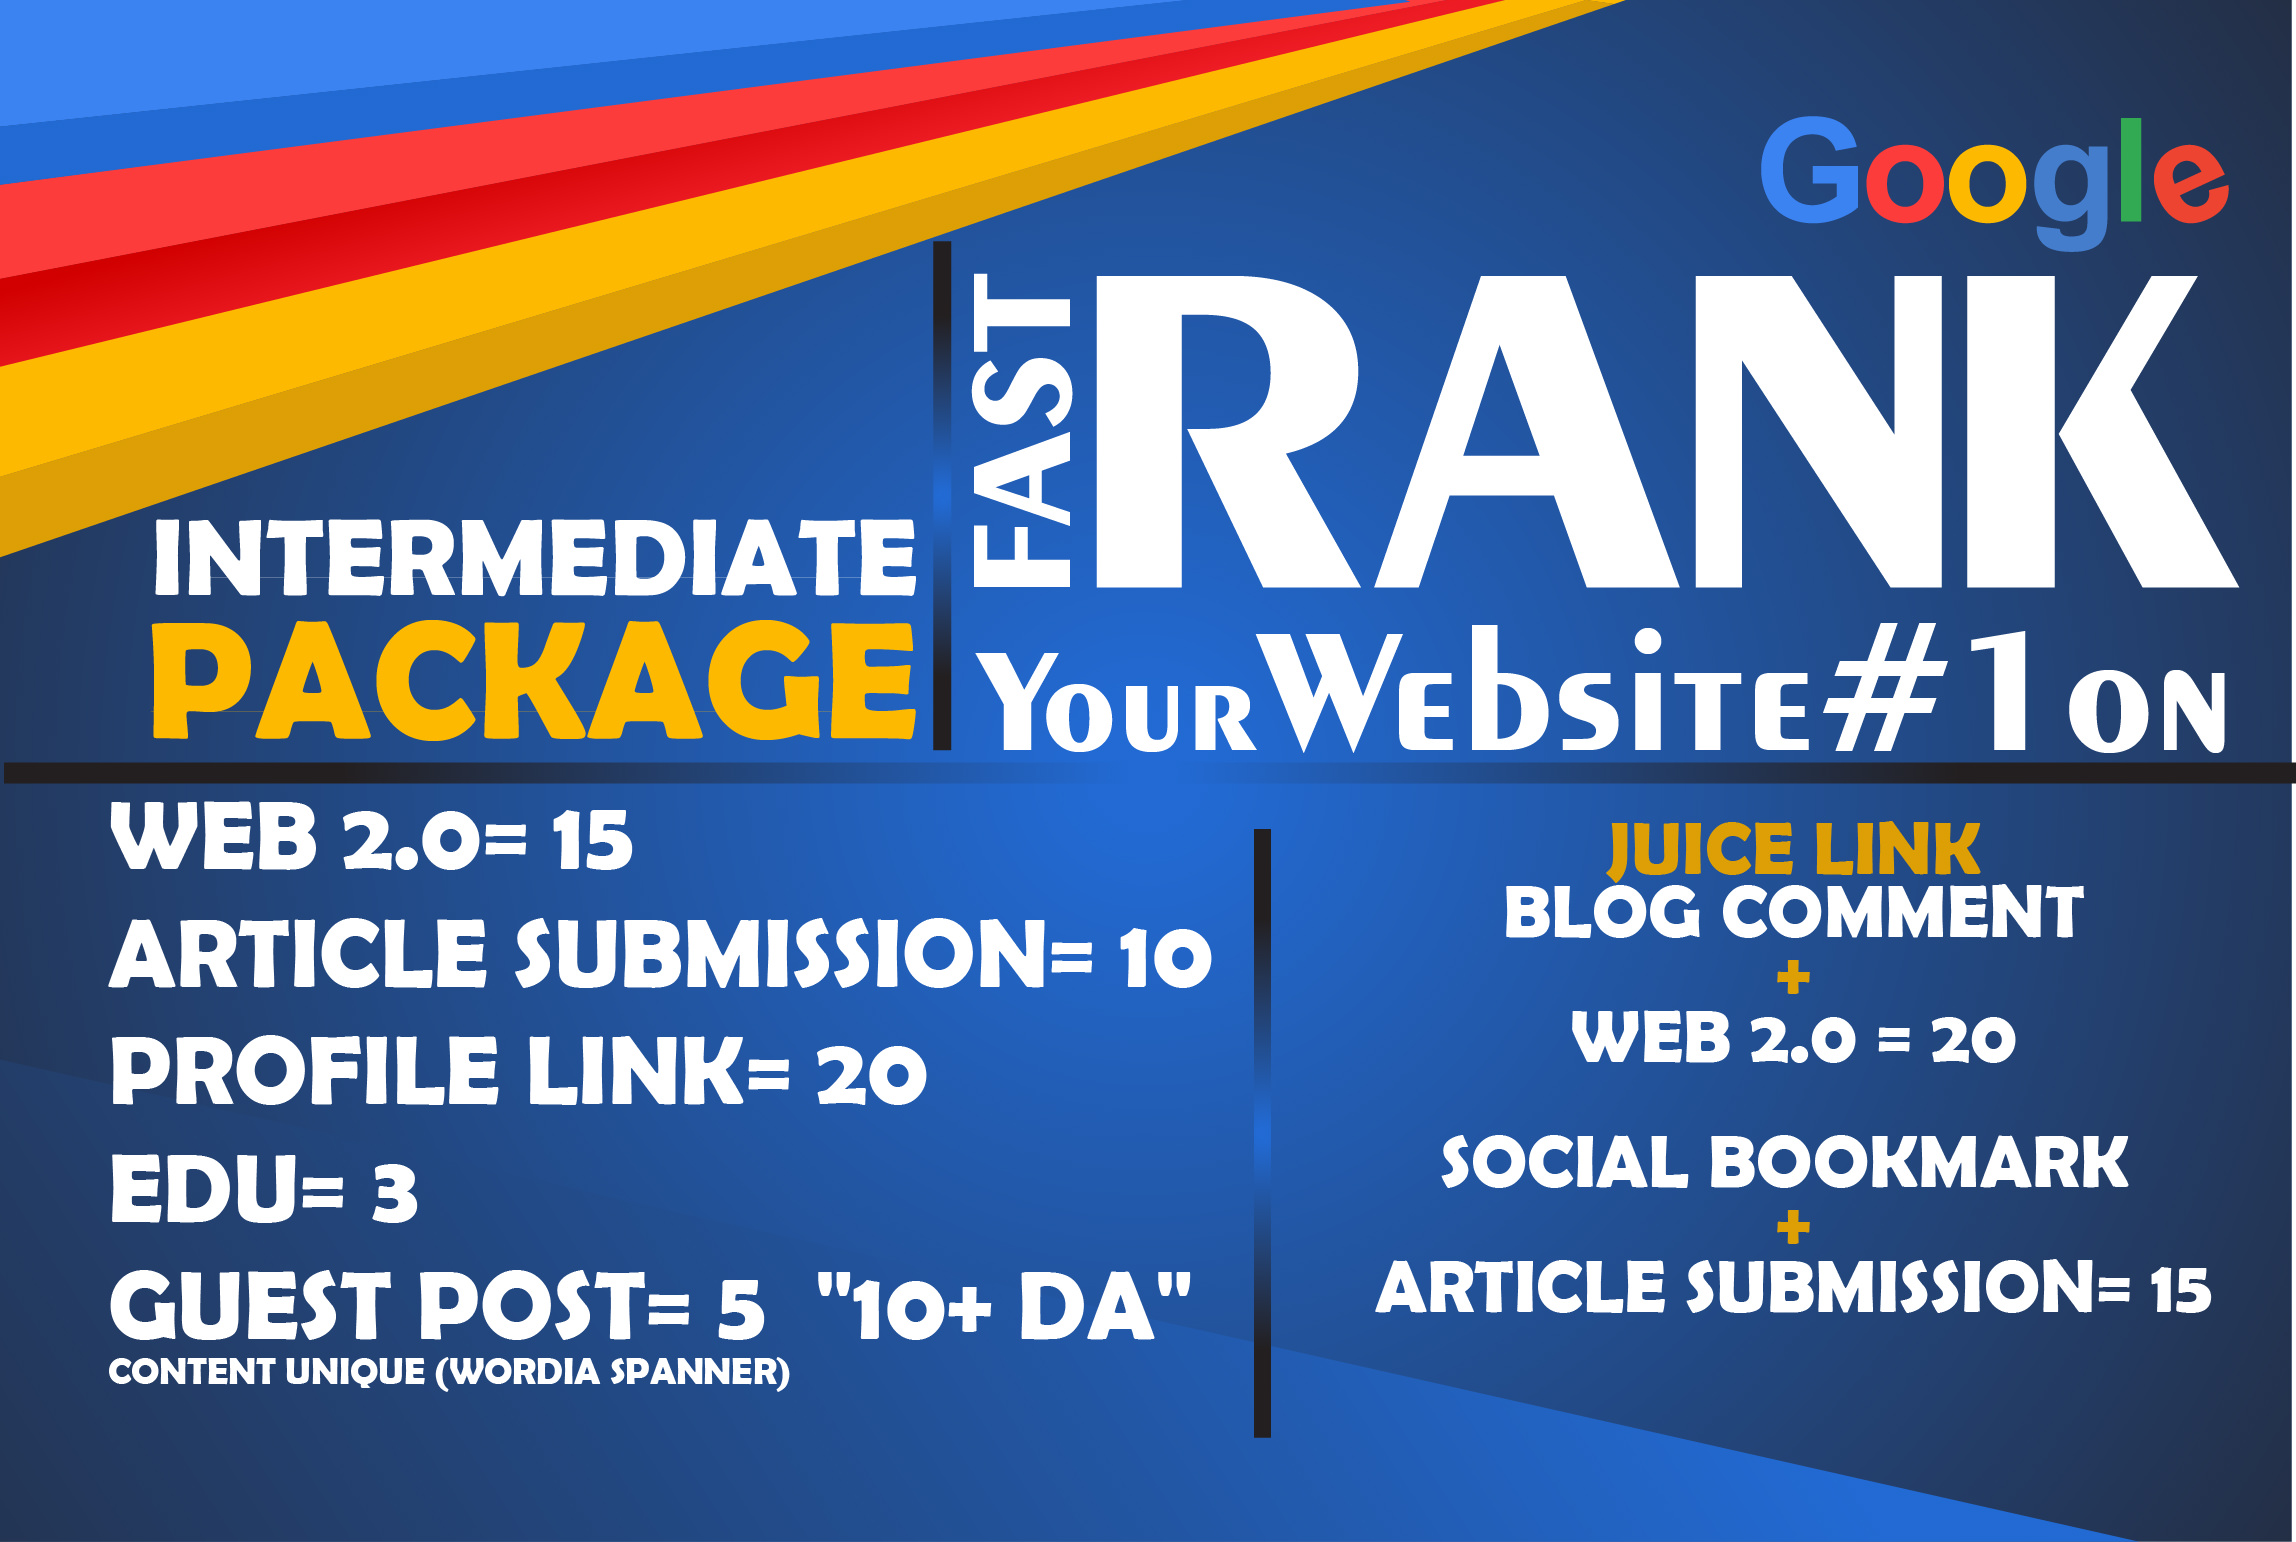 INTERMEDIATE PACKAGE - Manual Job - Latest Google Algorithm Breaker - Improve Your Ranking To Page 1